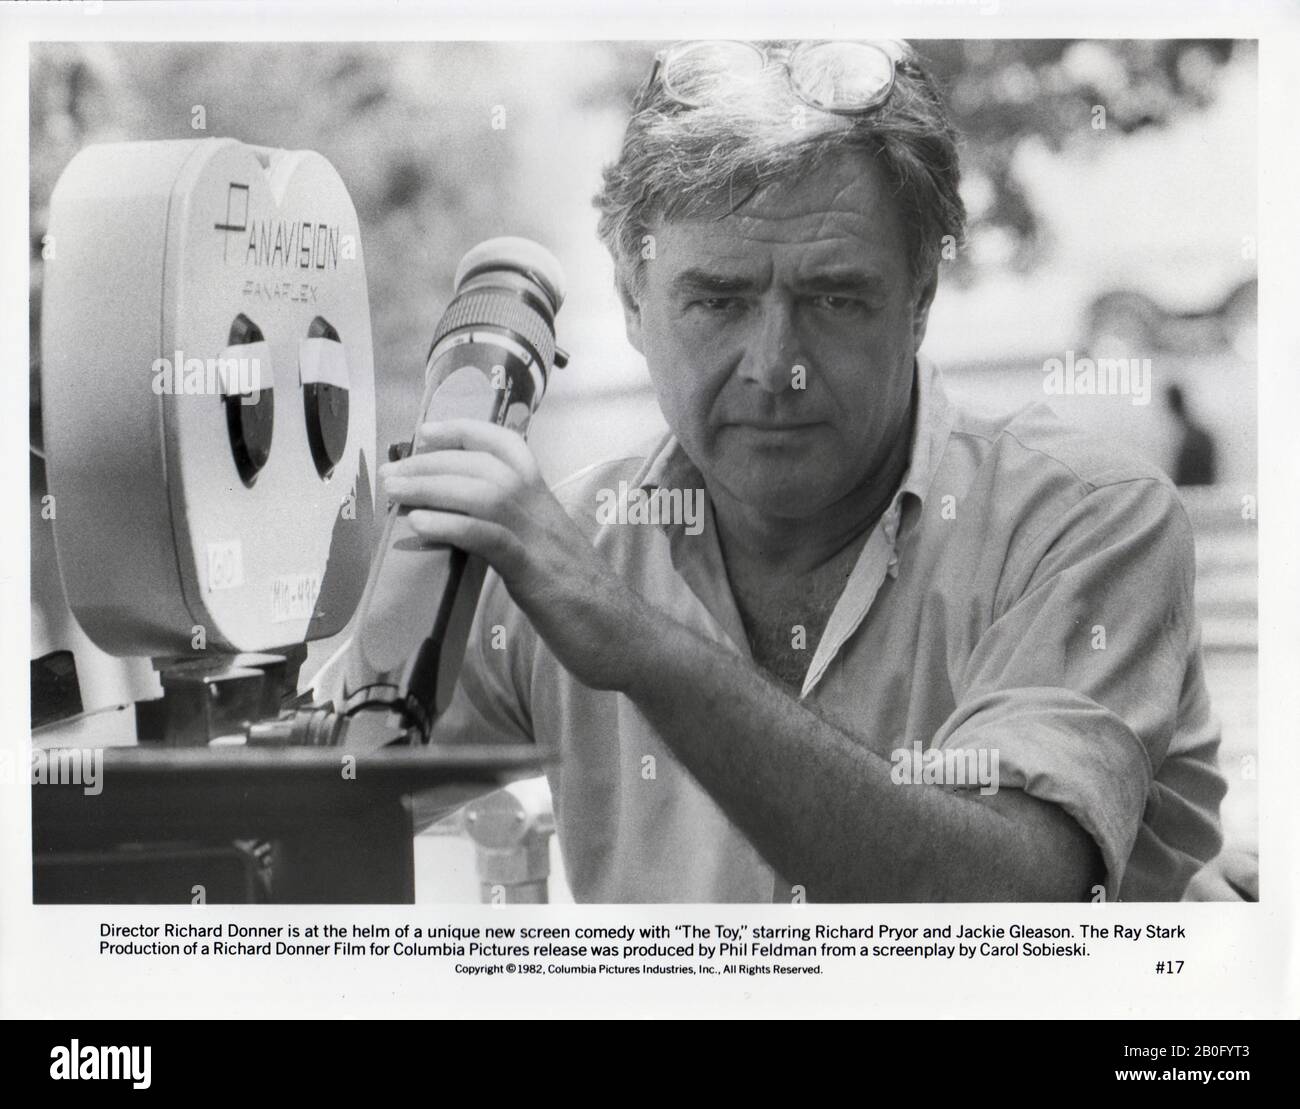 RICHARD DONNER ON SET OF 'THE TOY' (1982) COLUMBIA/MOVIESTORE COLLECTION LTD Stock Photo